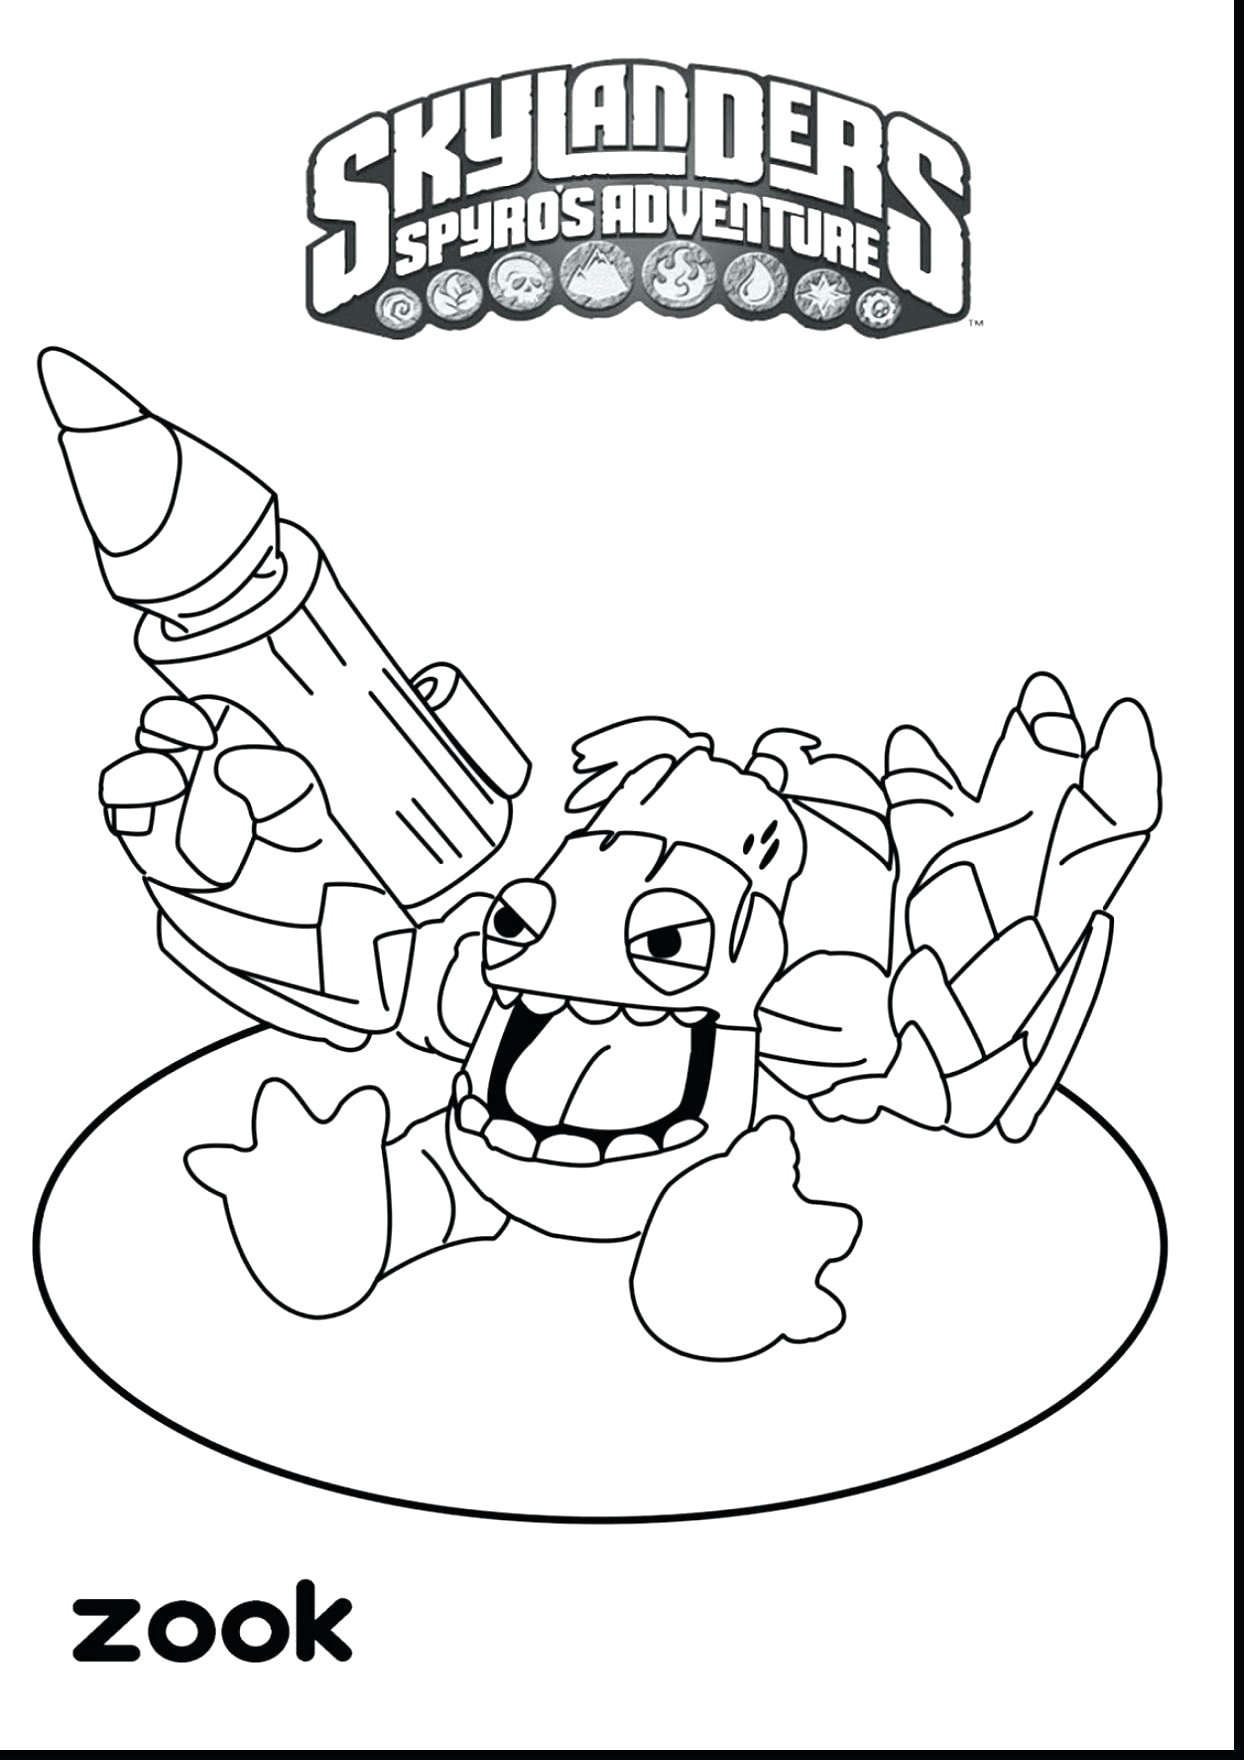 Drawings Easy with Color Www Colouring Pages Brilliant Easy to Draw Instruments Home Coloring